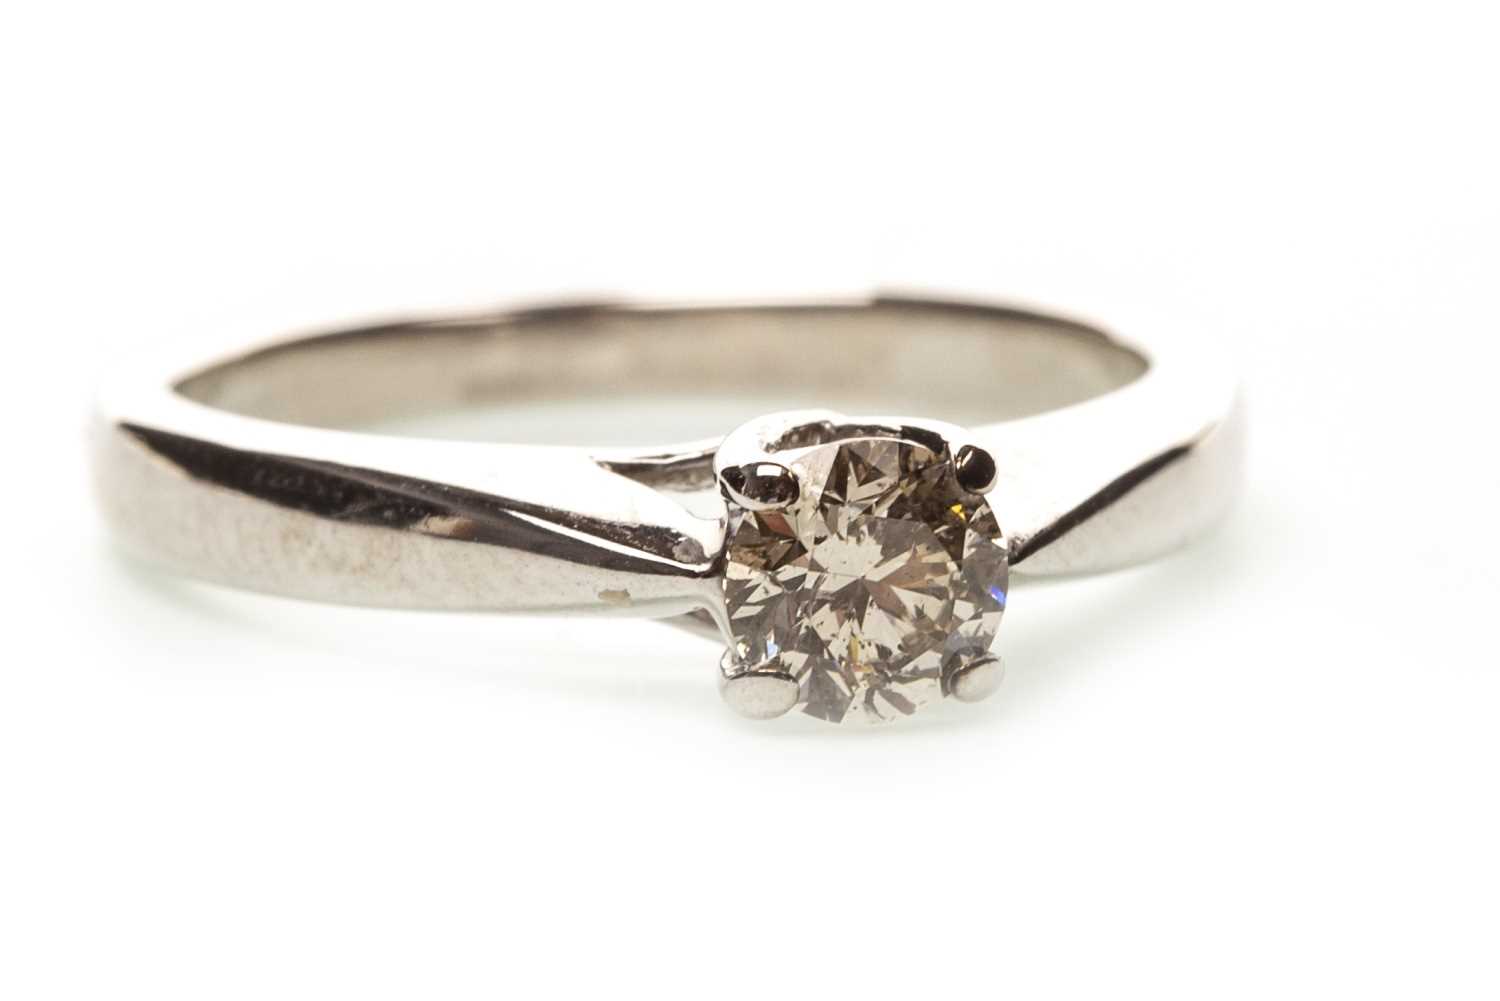 Lot 6 - A DIAMOND SOLITAIRE RING